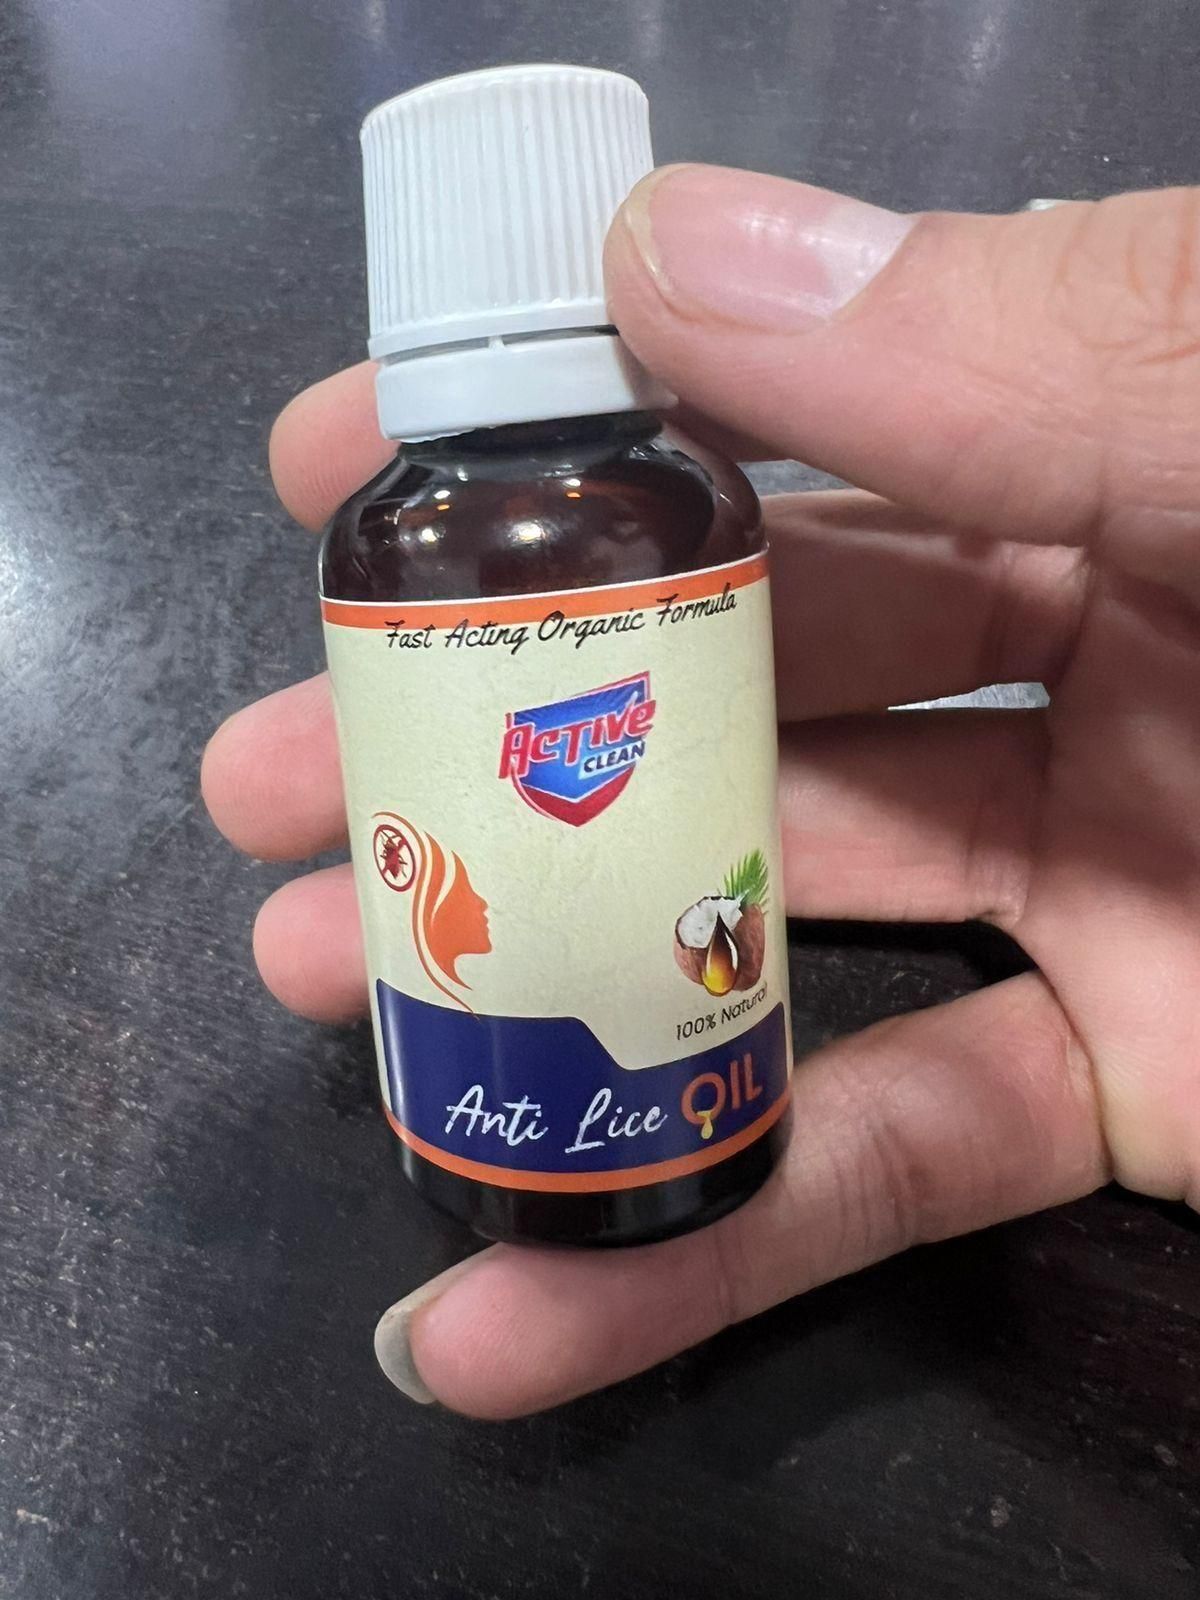 🔥 Lice removal Anti Lice Oil Pack of 2 🔥